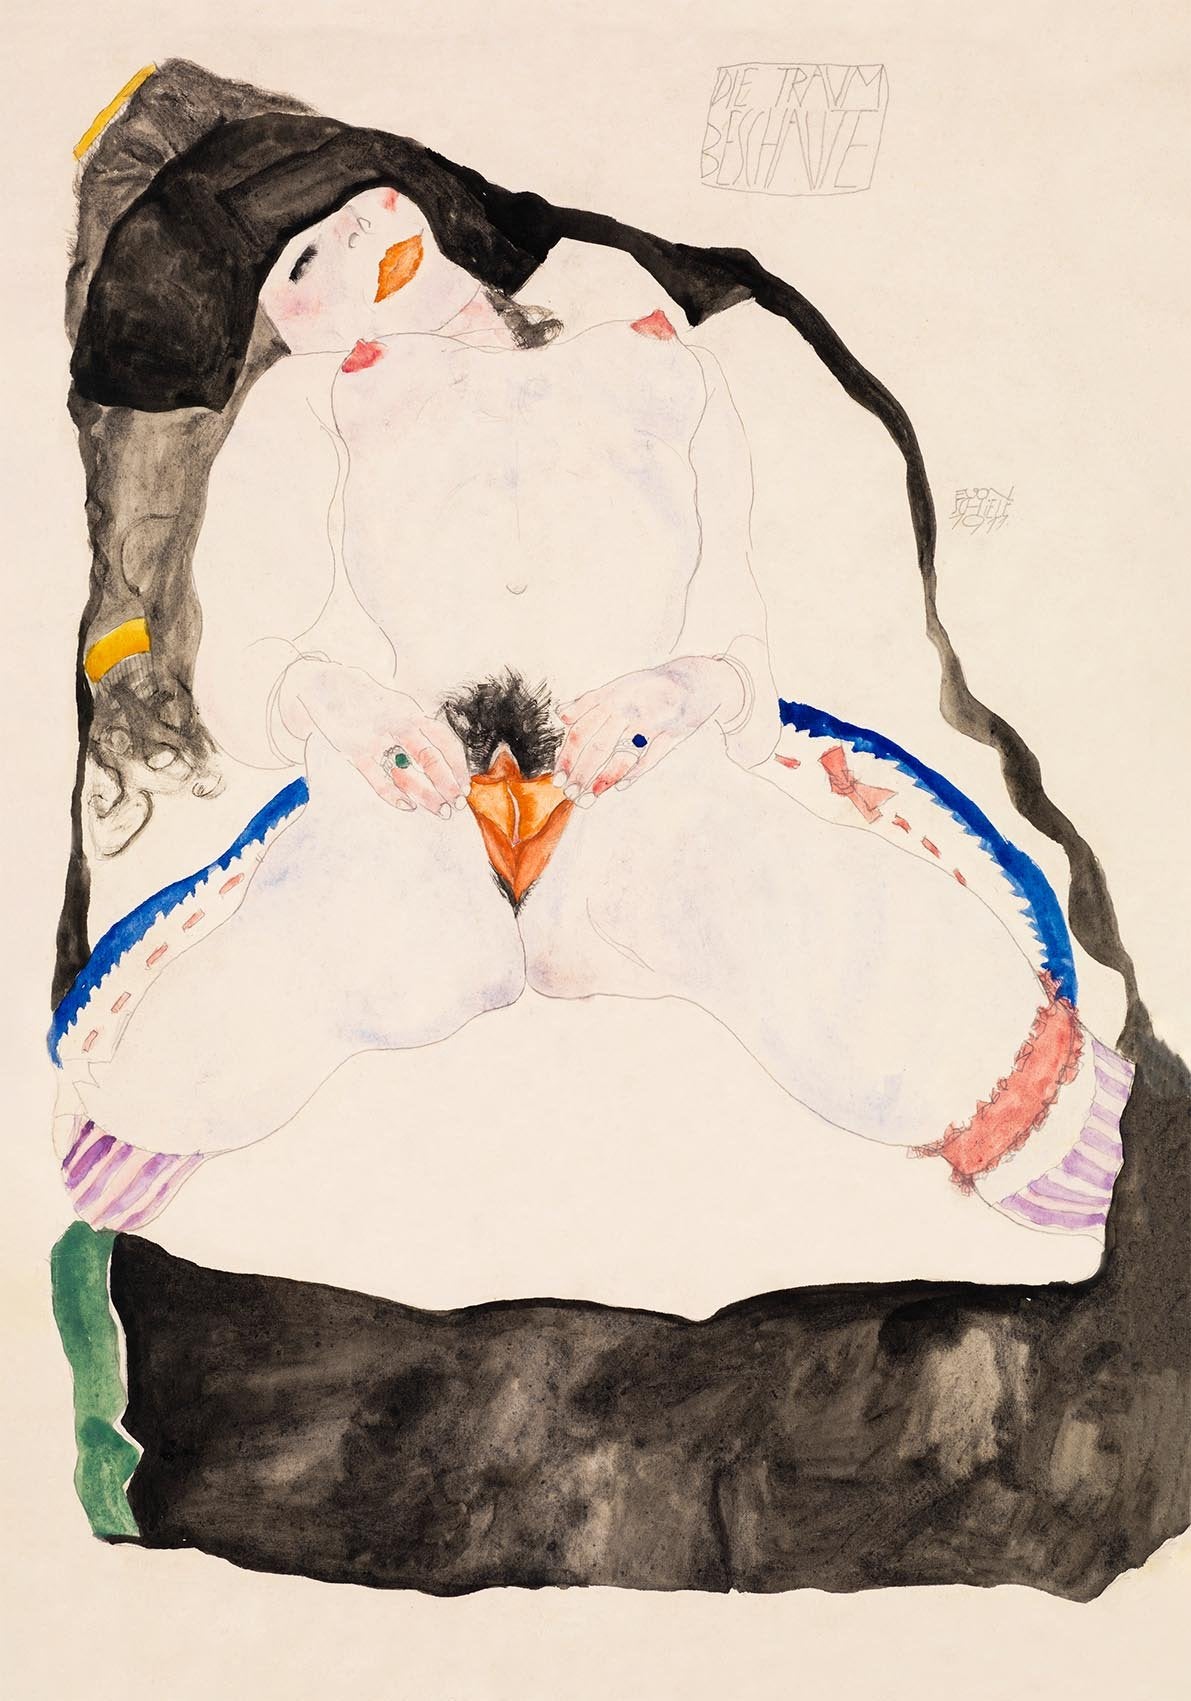 Observed in a Dream by Egon Schiele